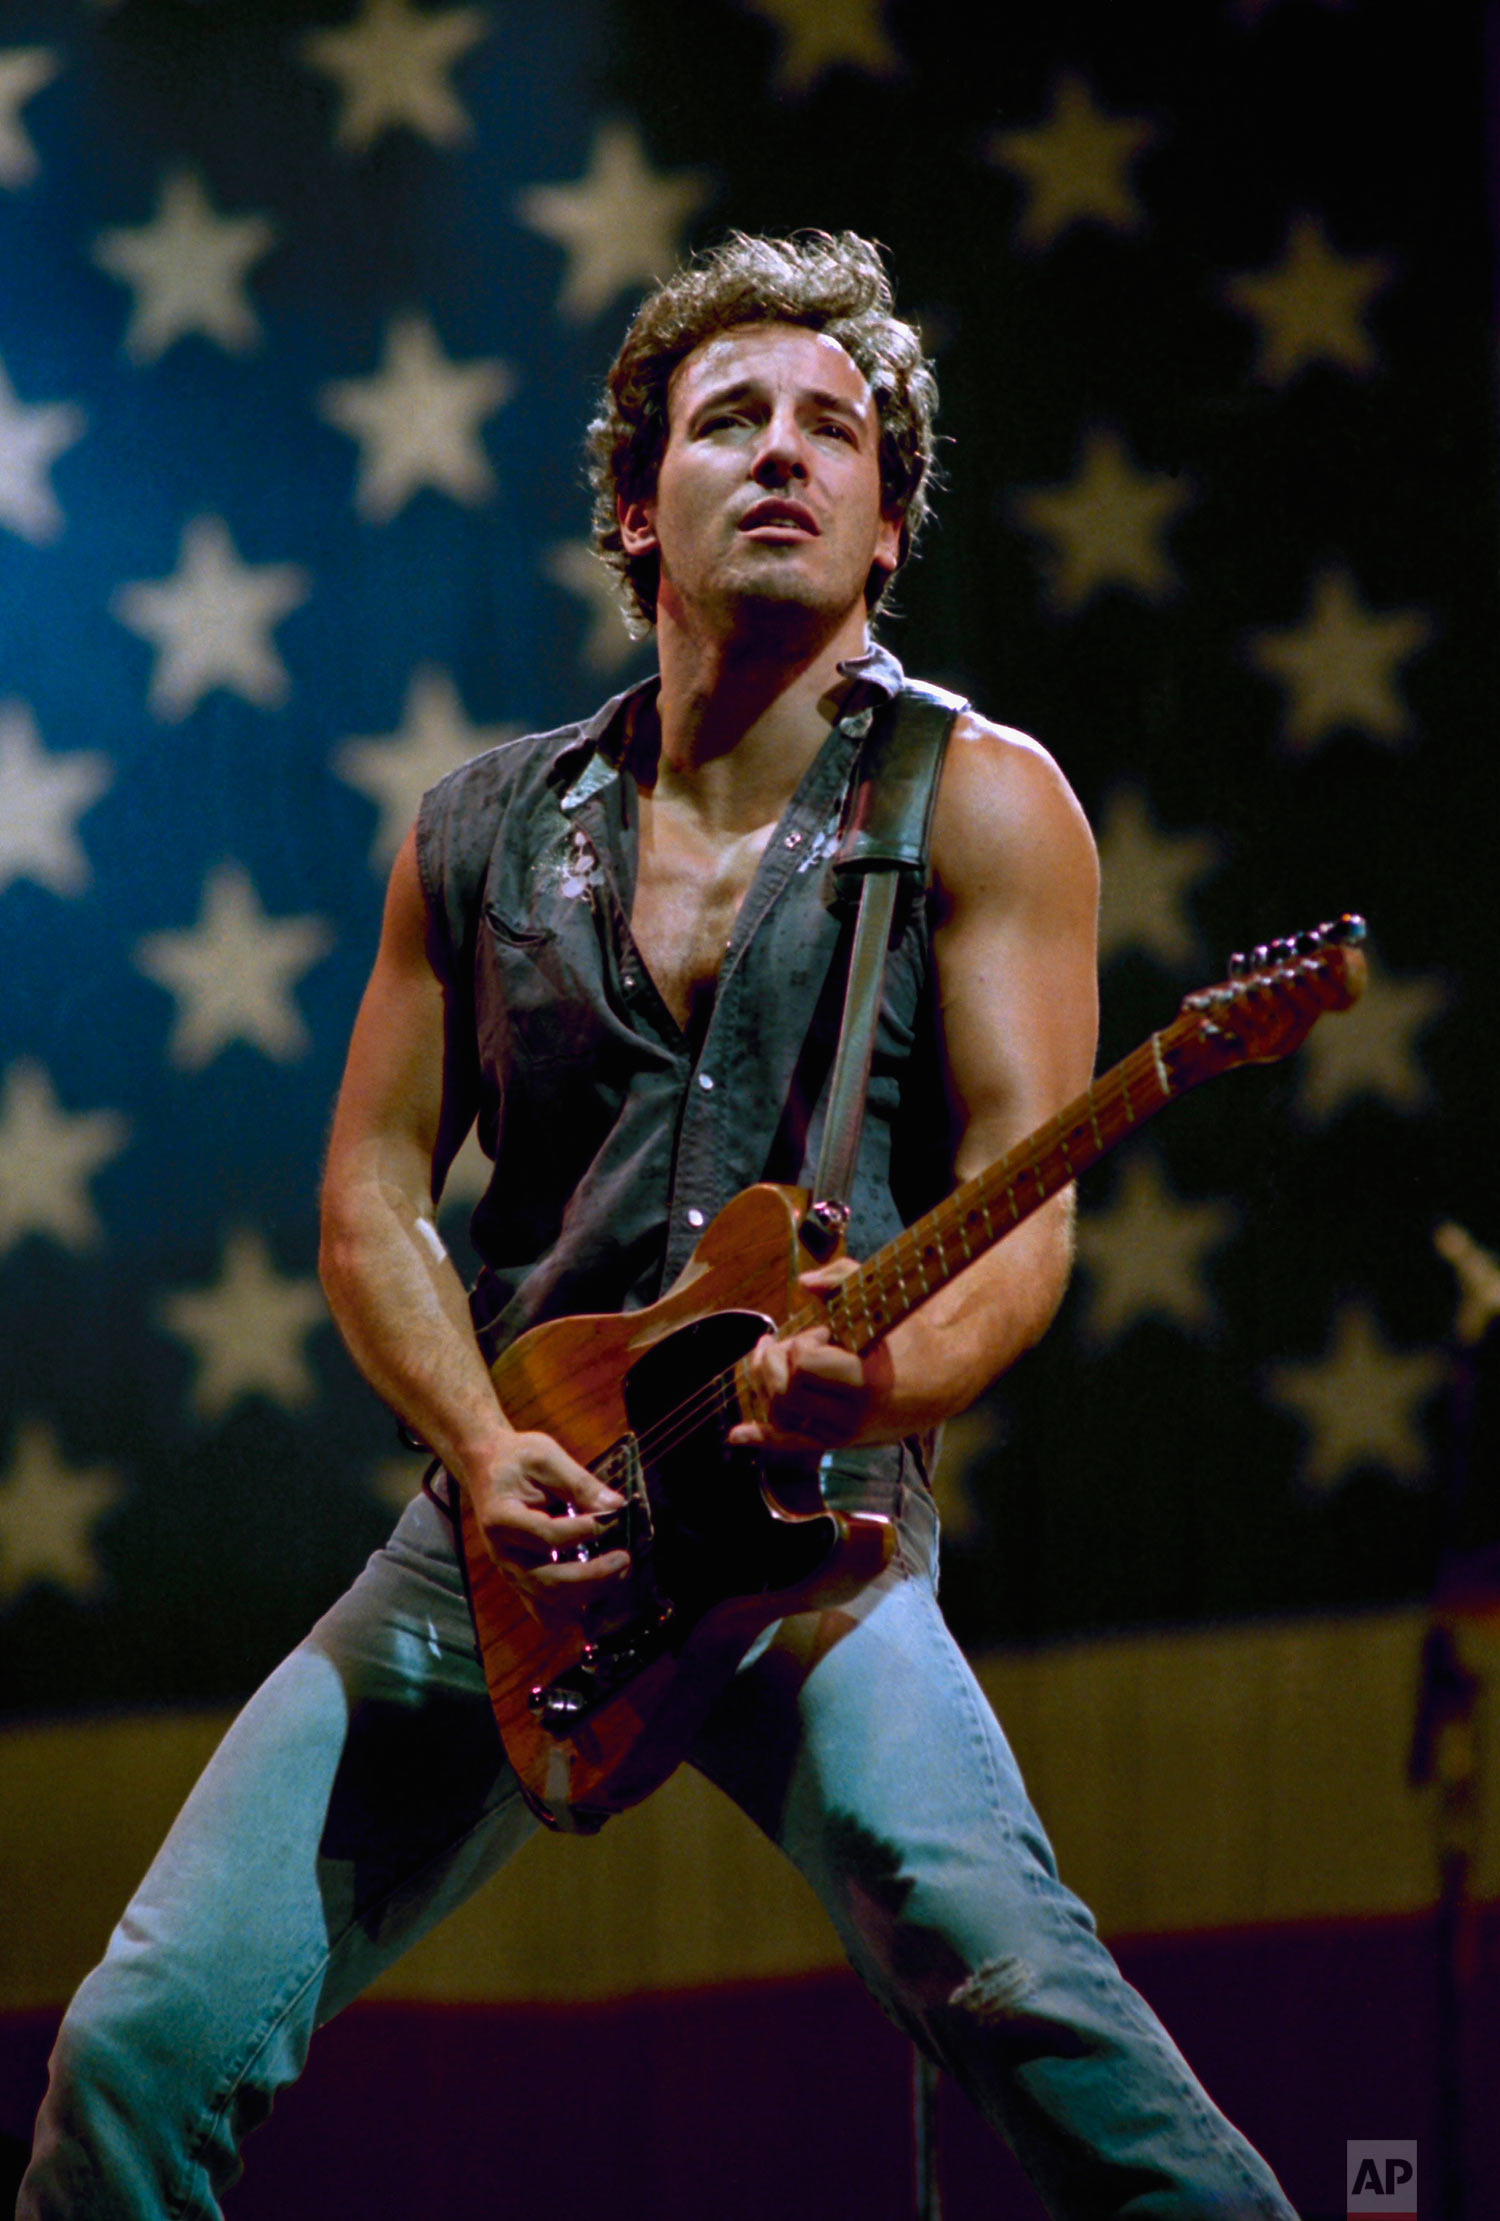  U.S. performer Bruce Springsteen plays his Fender Telecaster guitar while singing his hit song "Born in the U.S.A." as he completed his world tour at Los Angeles Memorial Coliseum in September 1985. (AP Photo/Lennox McLendon) 